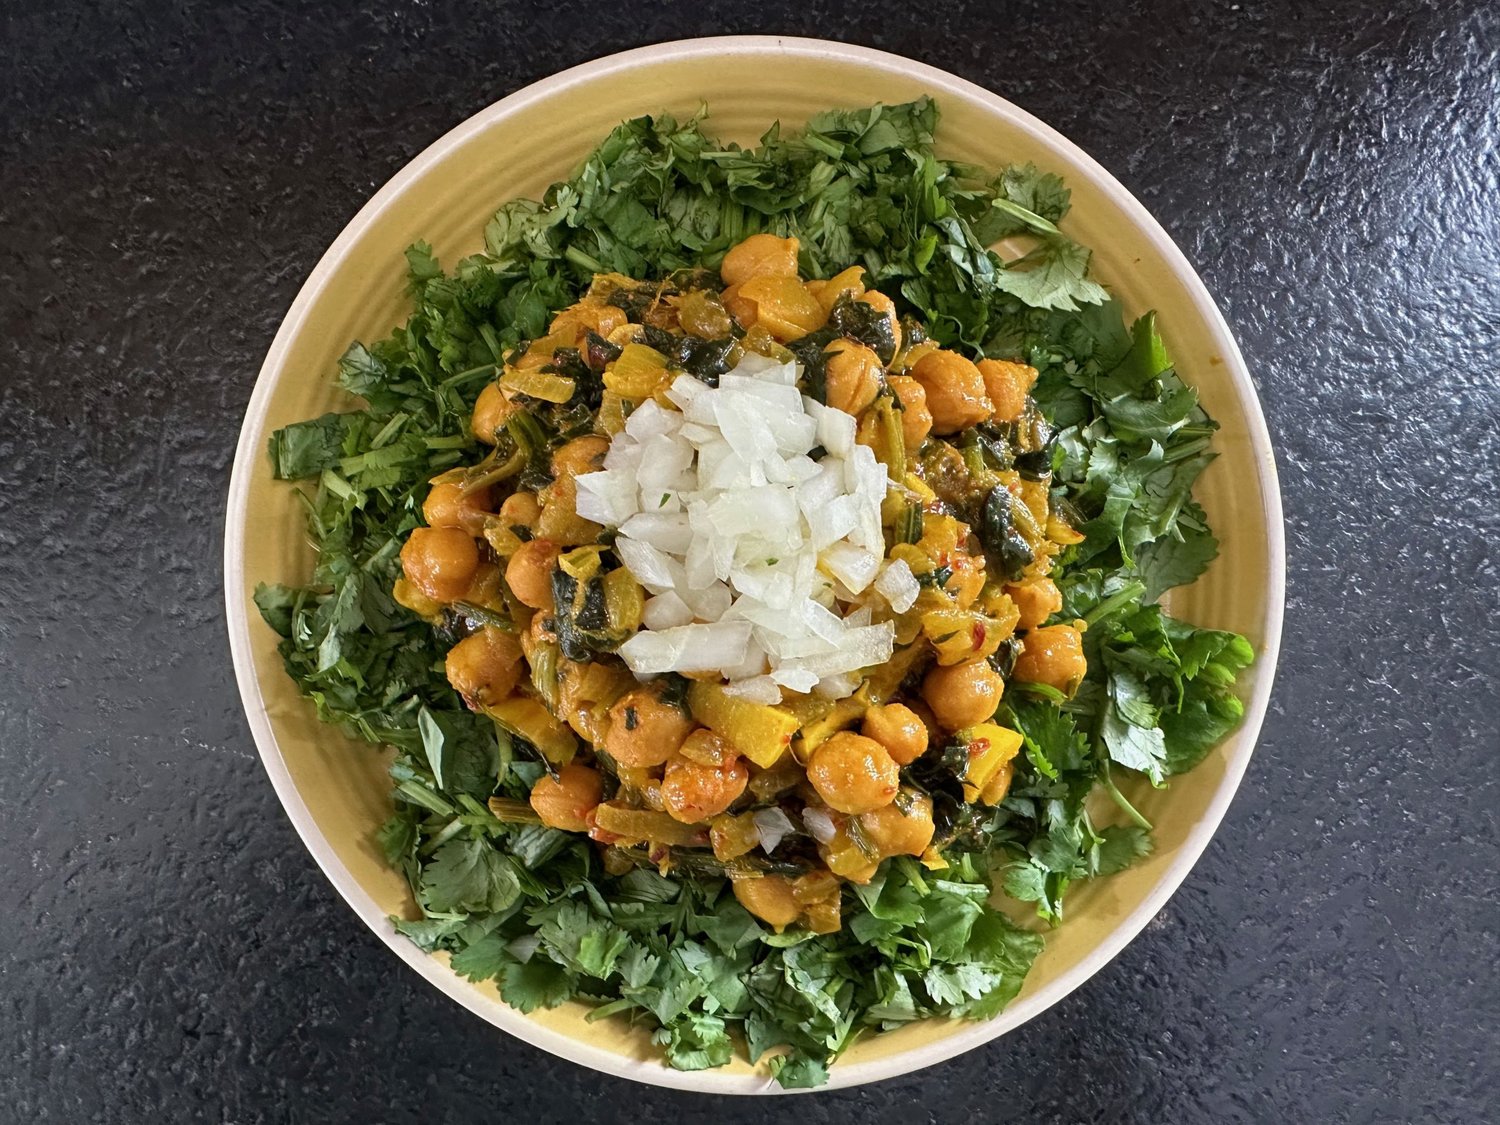 Indian chefs have many tricks for making vegetarian dishes satisfying without resorting to imitation meat. In this Indian-inspired chickpea recipe, the raspy flavor of the turmeric, the piercing bite of the lemon, the herbal aroma of the cilantro and the earthy flavor of the spinach combine for an entrée that’s both simple and complex.